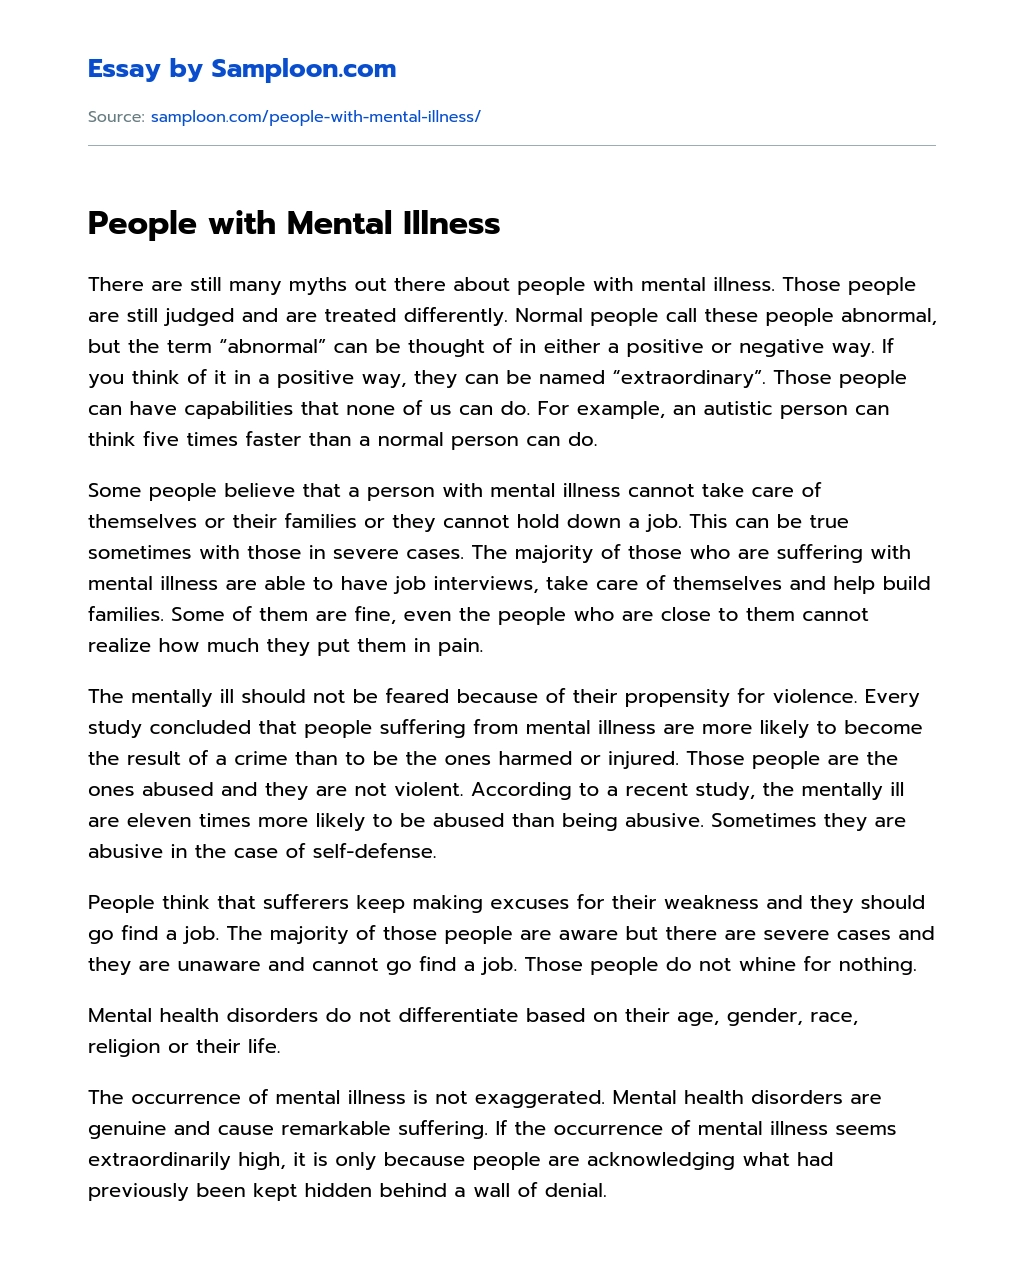 People with Mental Illness essay